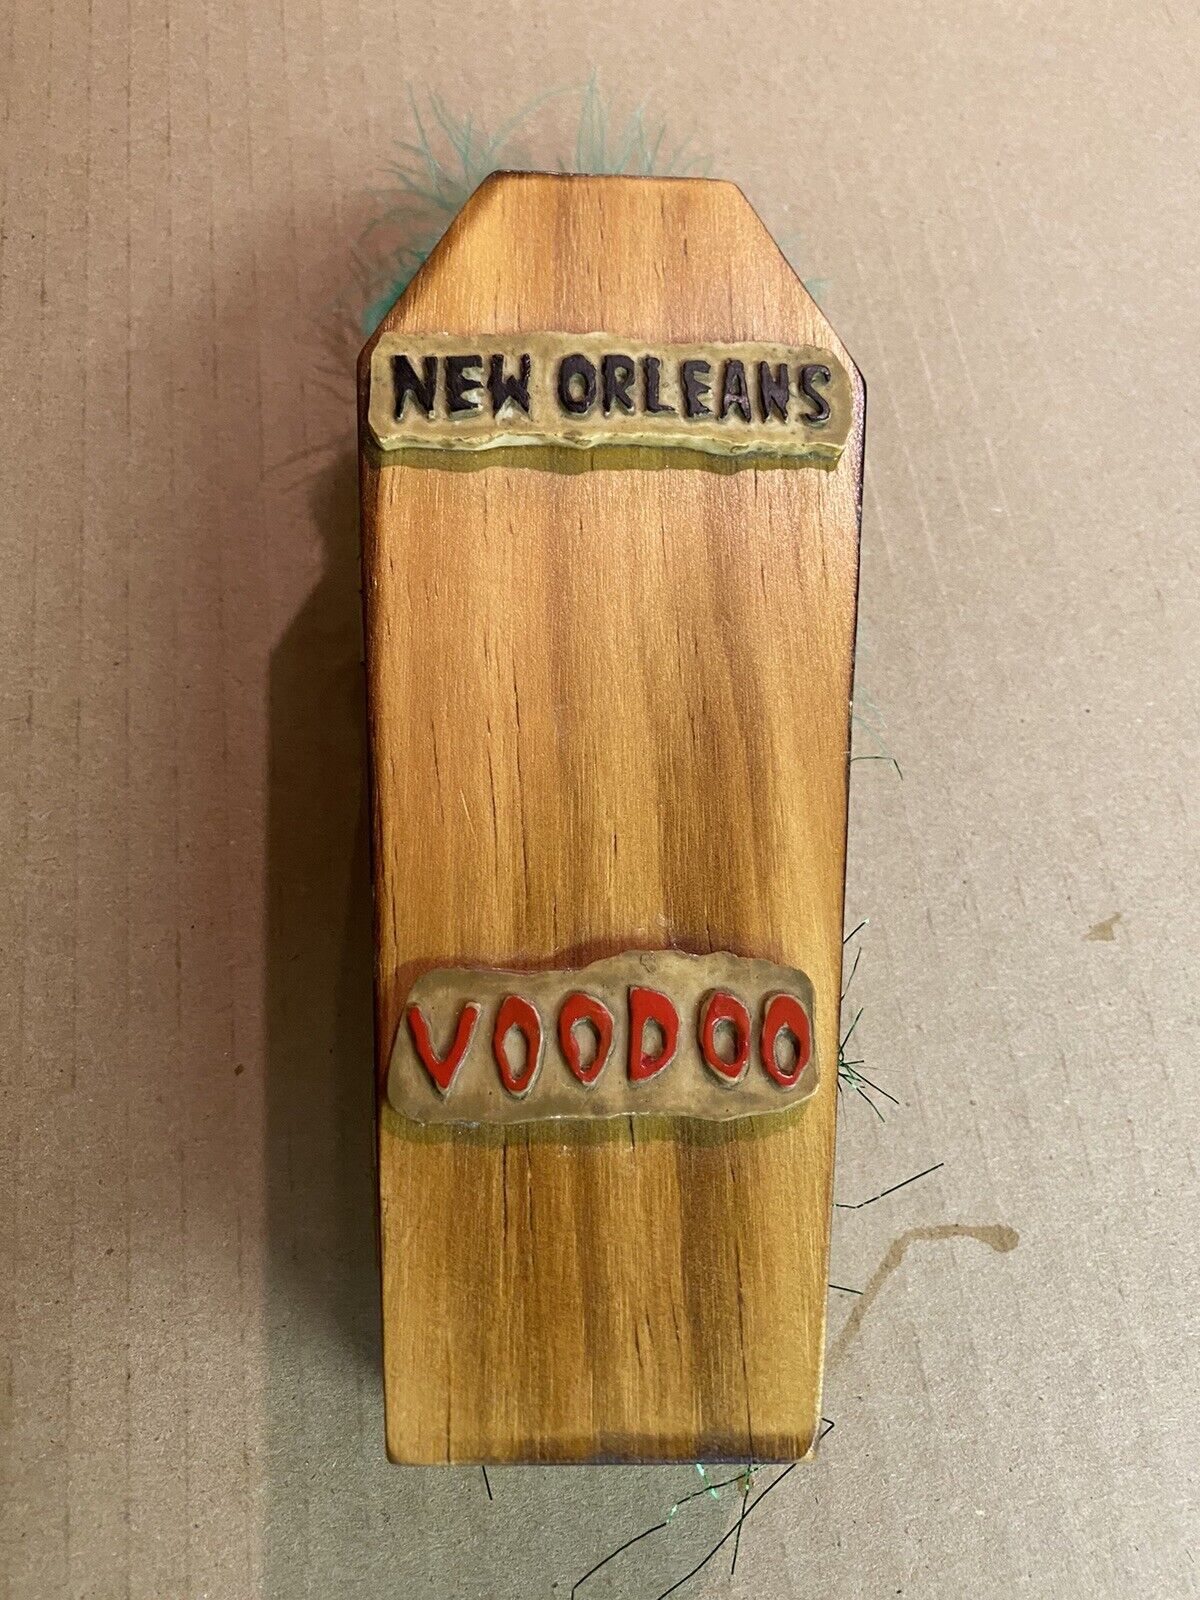 New Orleans Voodoo Toy w/ Instructions, Doll & Wood Coffin 7.5” L